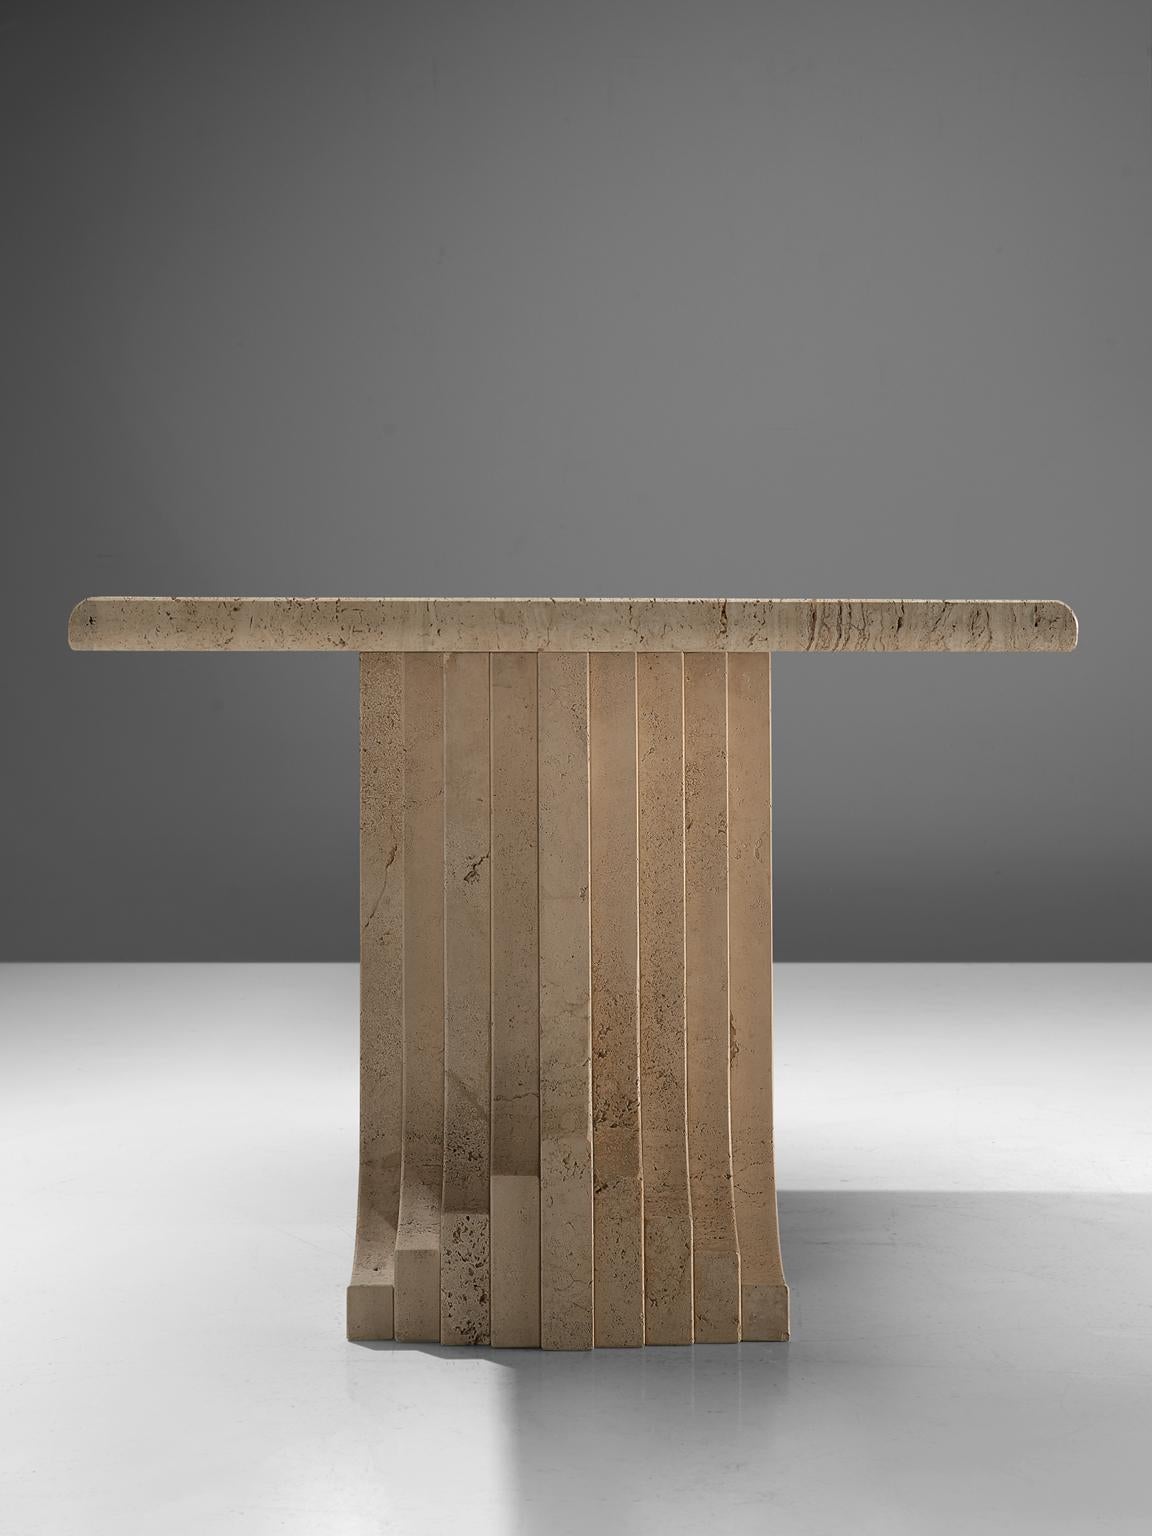 Late 20th Century Italian Travertine Dining Table with Layered Legs